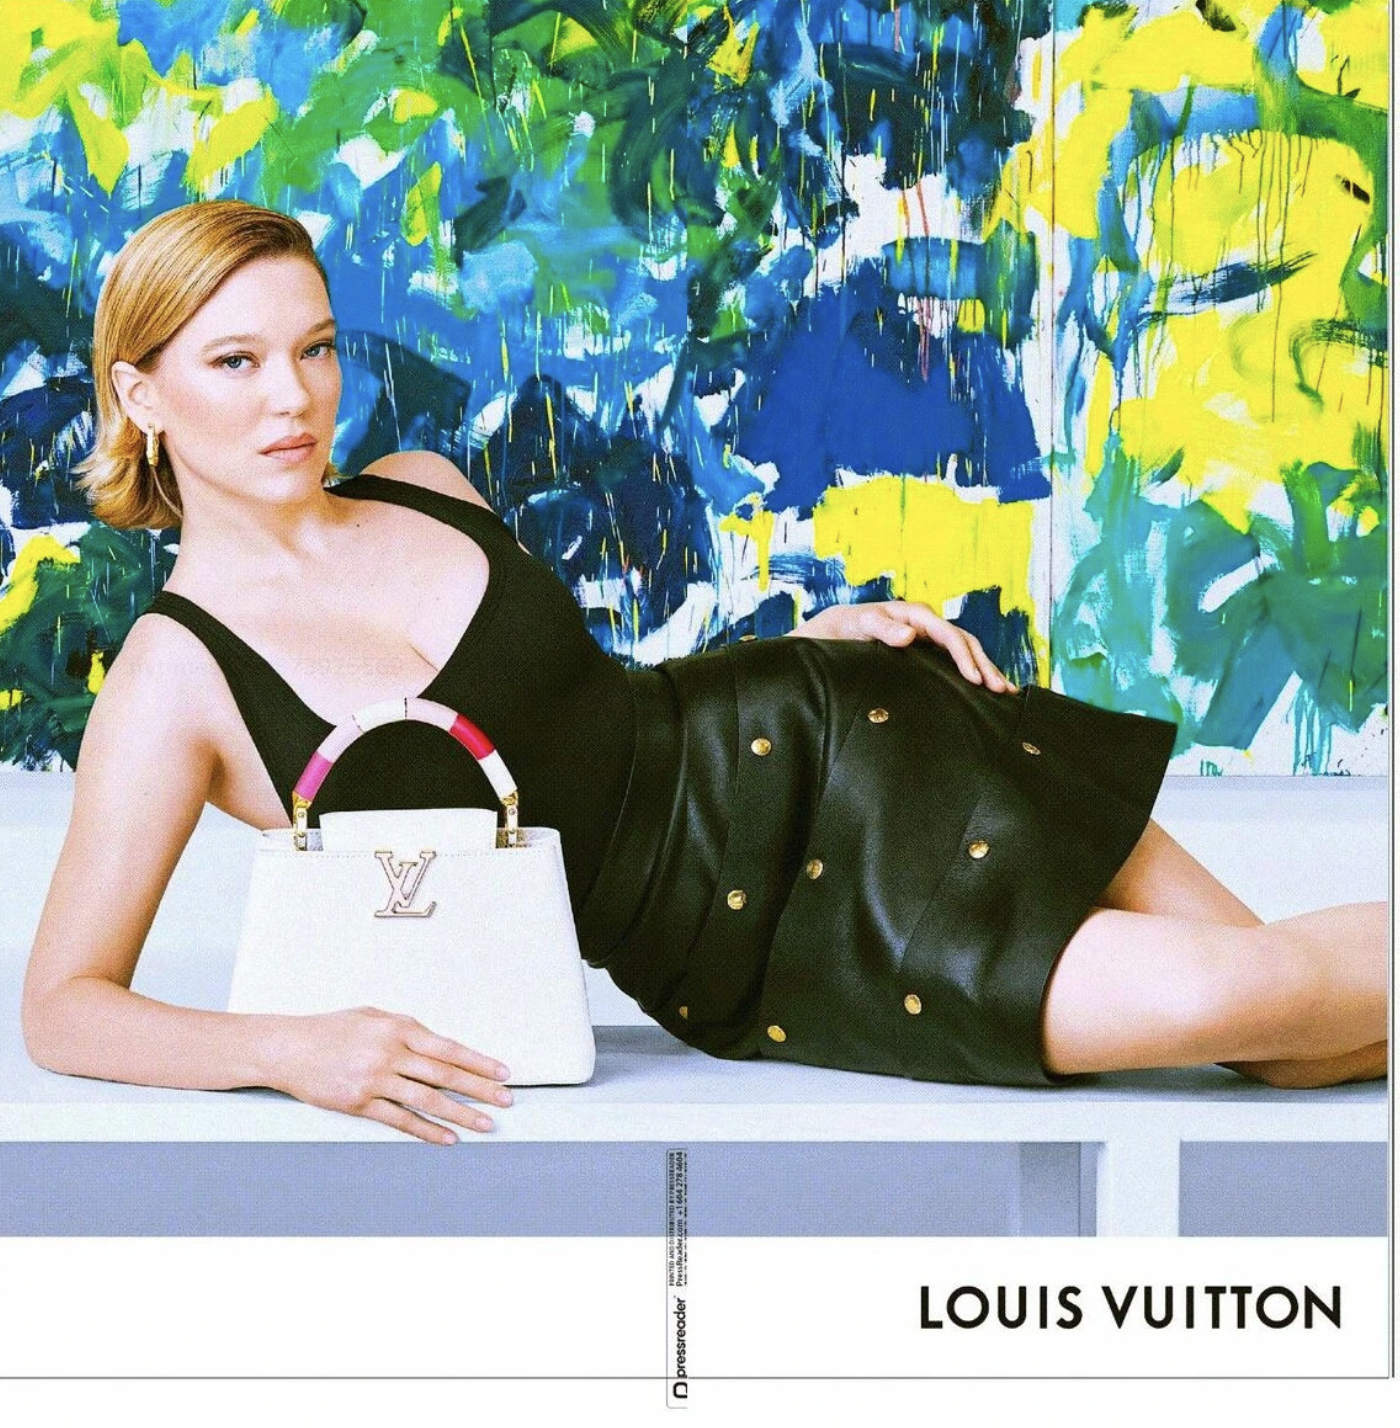 ArtDependence  Statement on Unauthorized Use of Joan Mitchell Artworks in Louis  Vuitton Ad Campaign